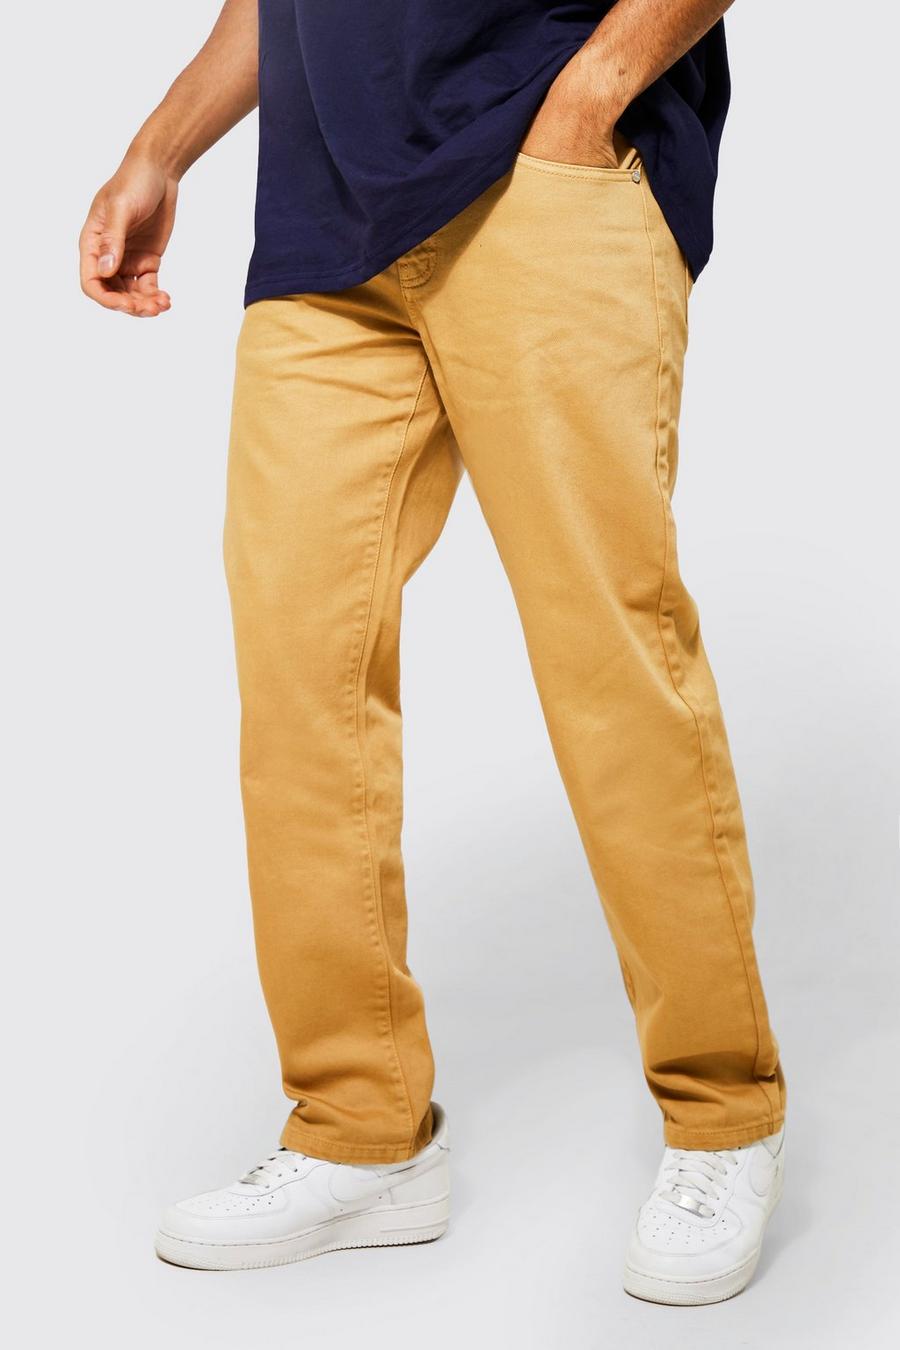 Tan brown Relaxed Fit Overdye Jeans